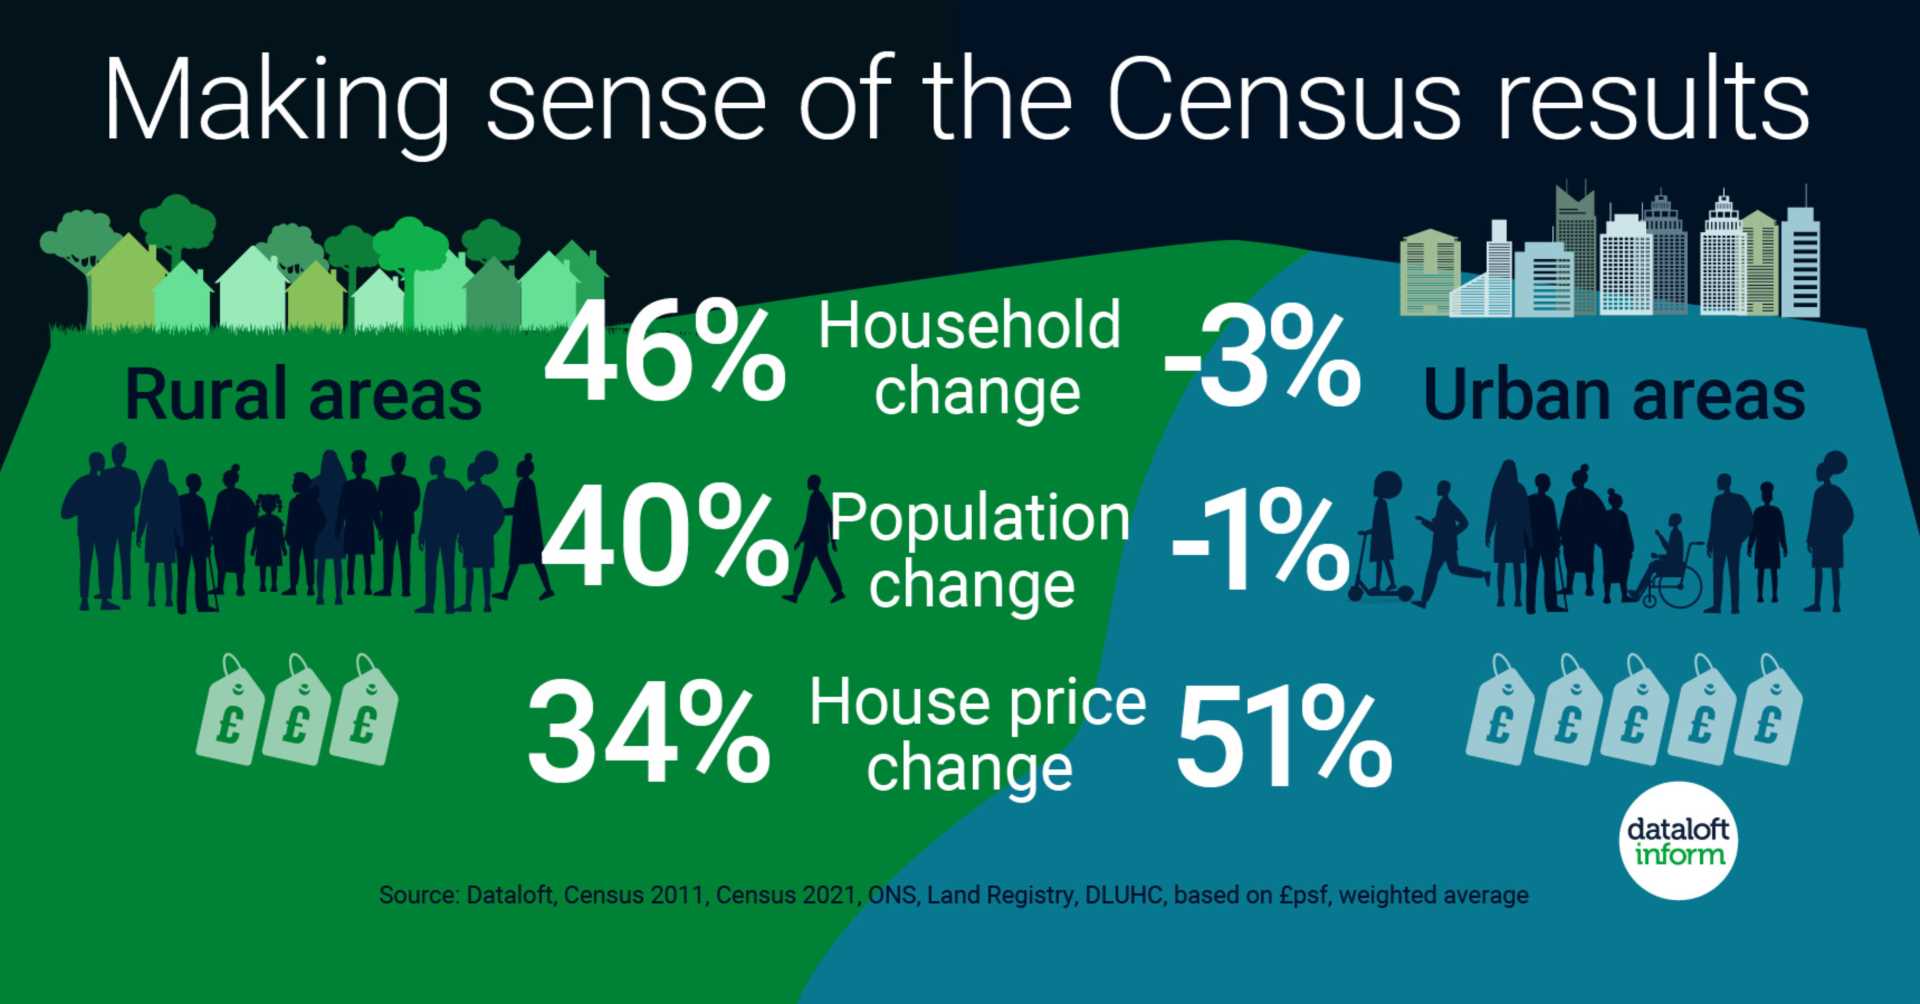 Making sense of the Census results